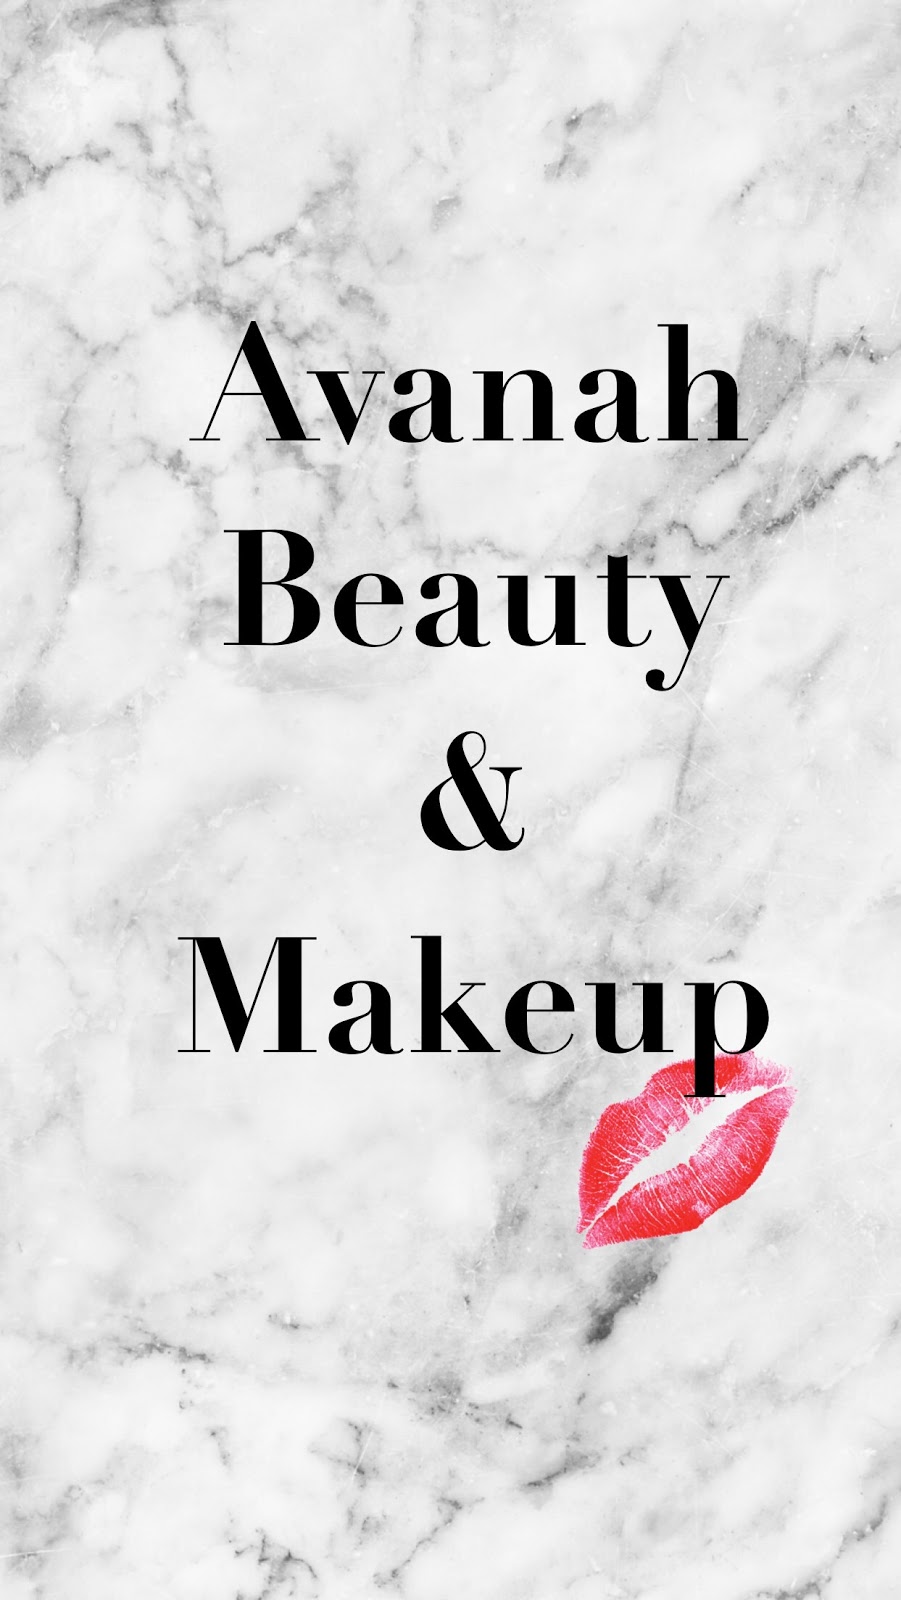 Avanah Beauty and Makeup | spa | 5/37 Central Coast Hwy, West Gosford NSW 2250, Australia | 0243220744 OR +61 2 4322 0744